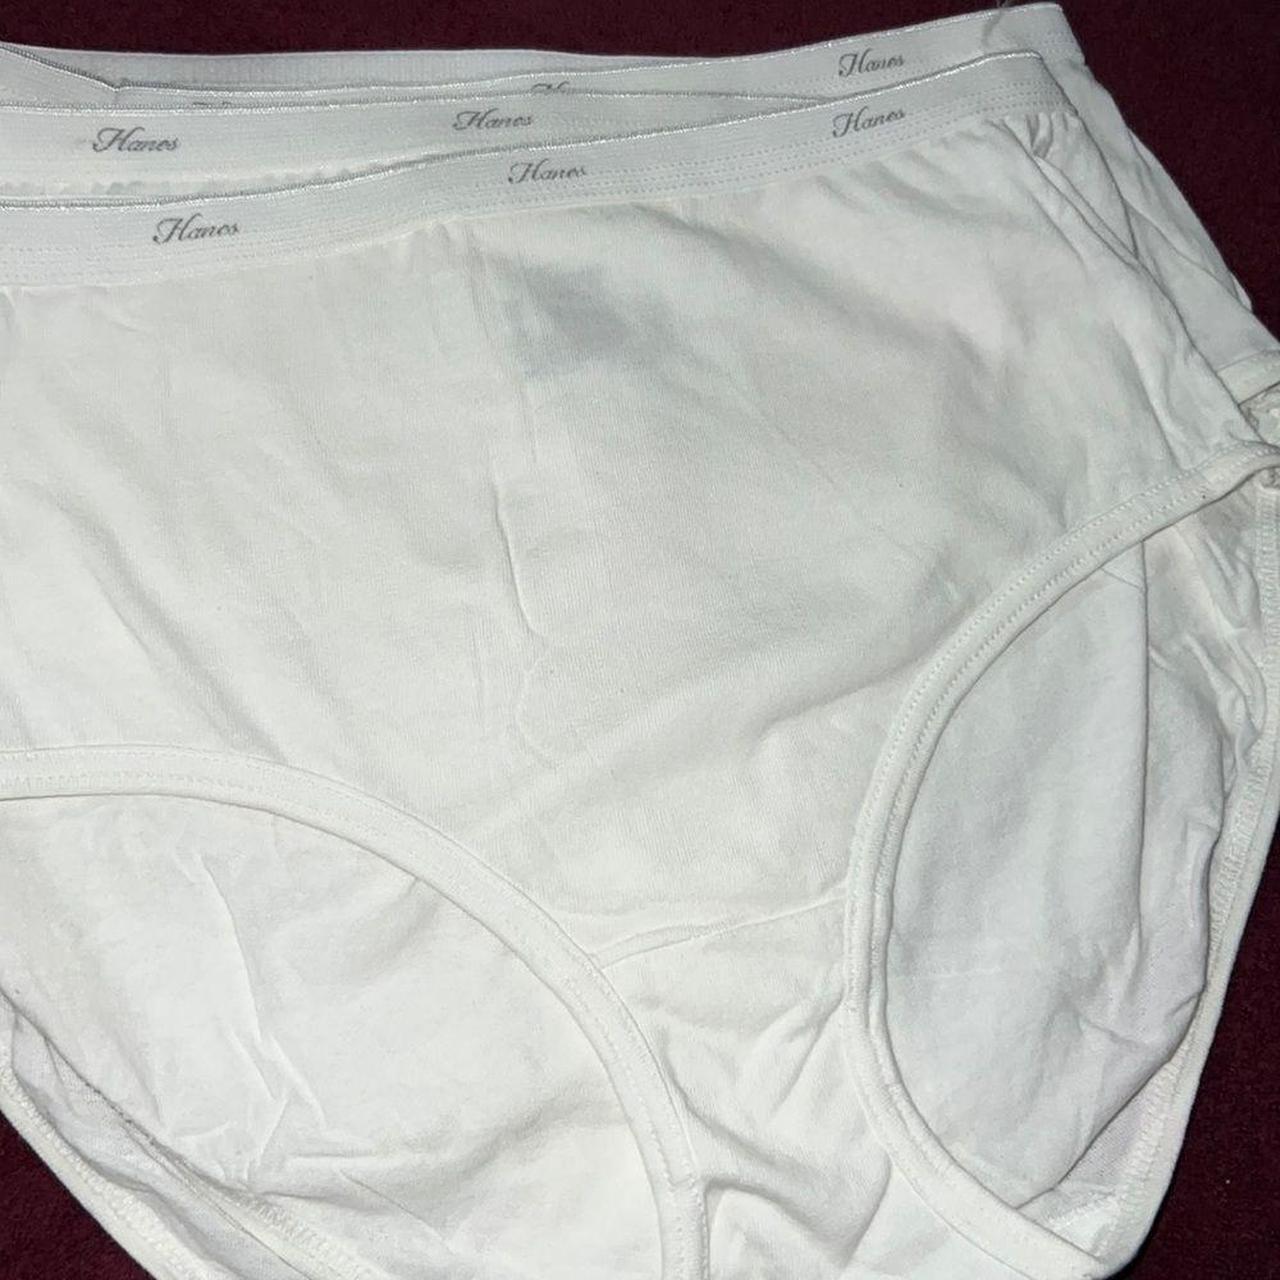 Hanes size 6 full coverage panties, 100% cotton, new - Depop